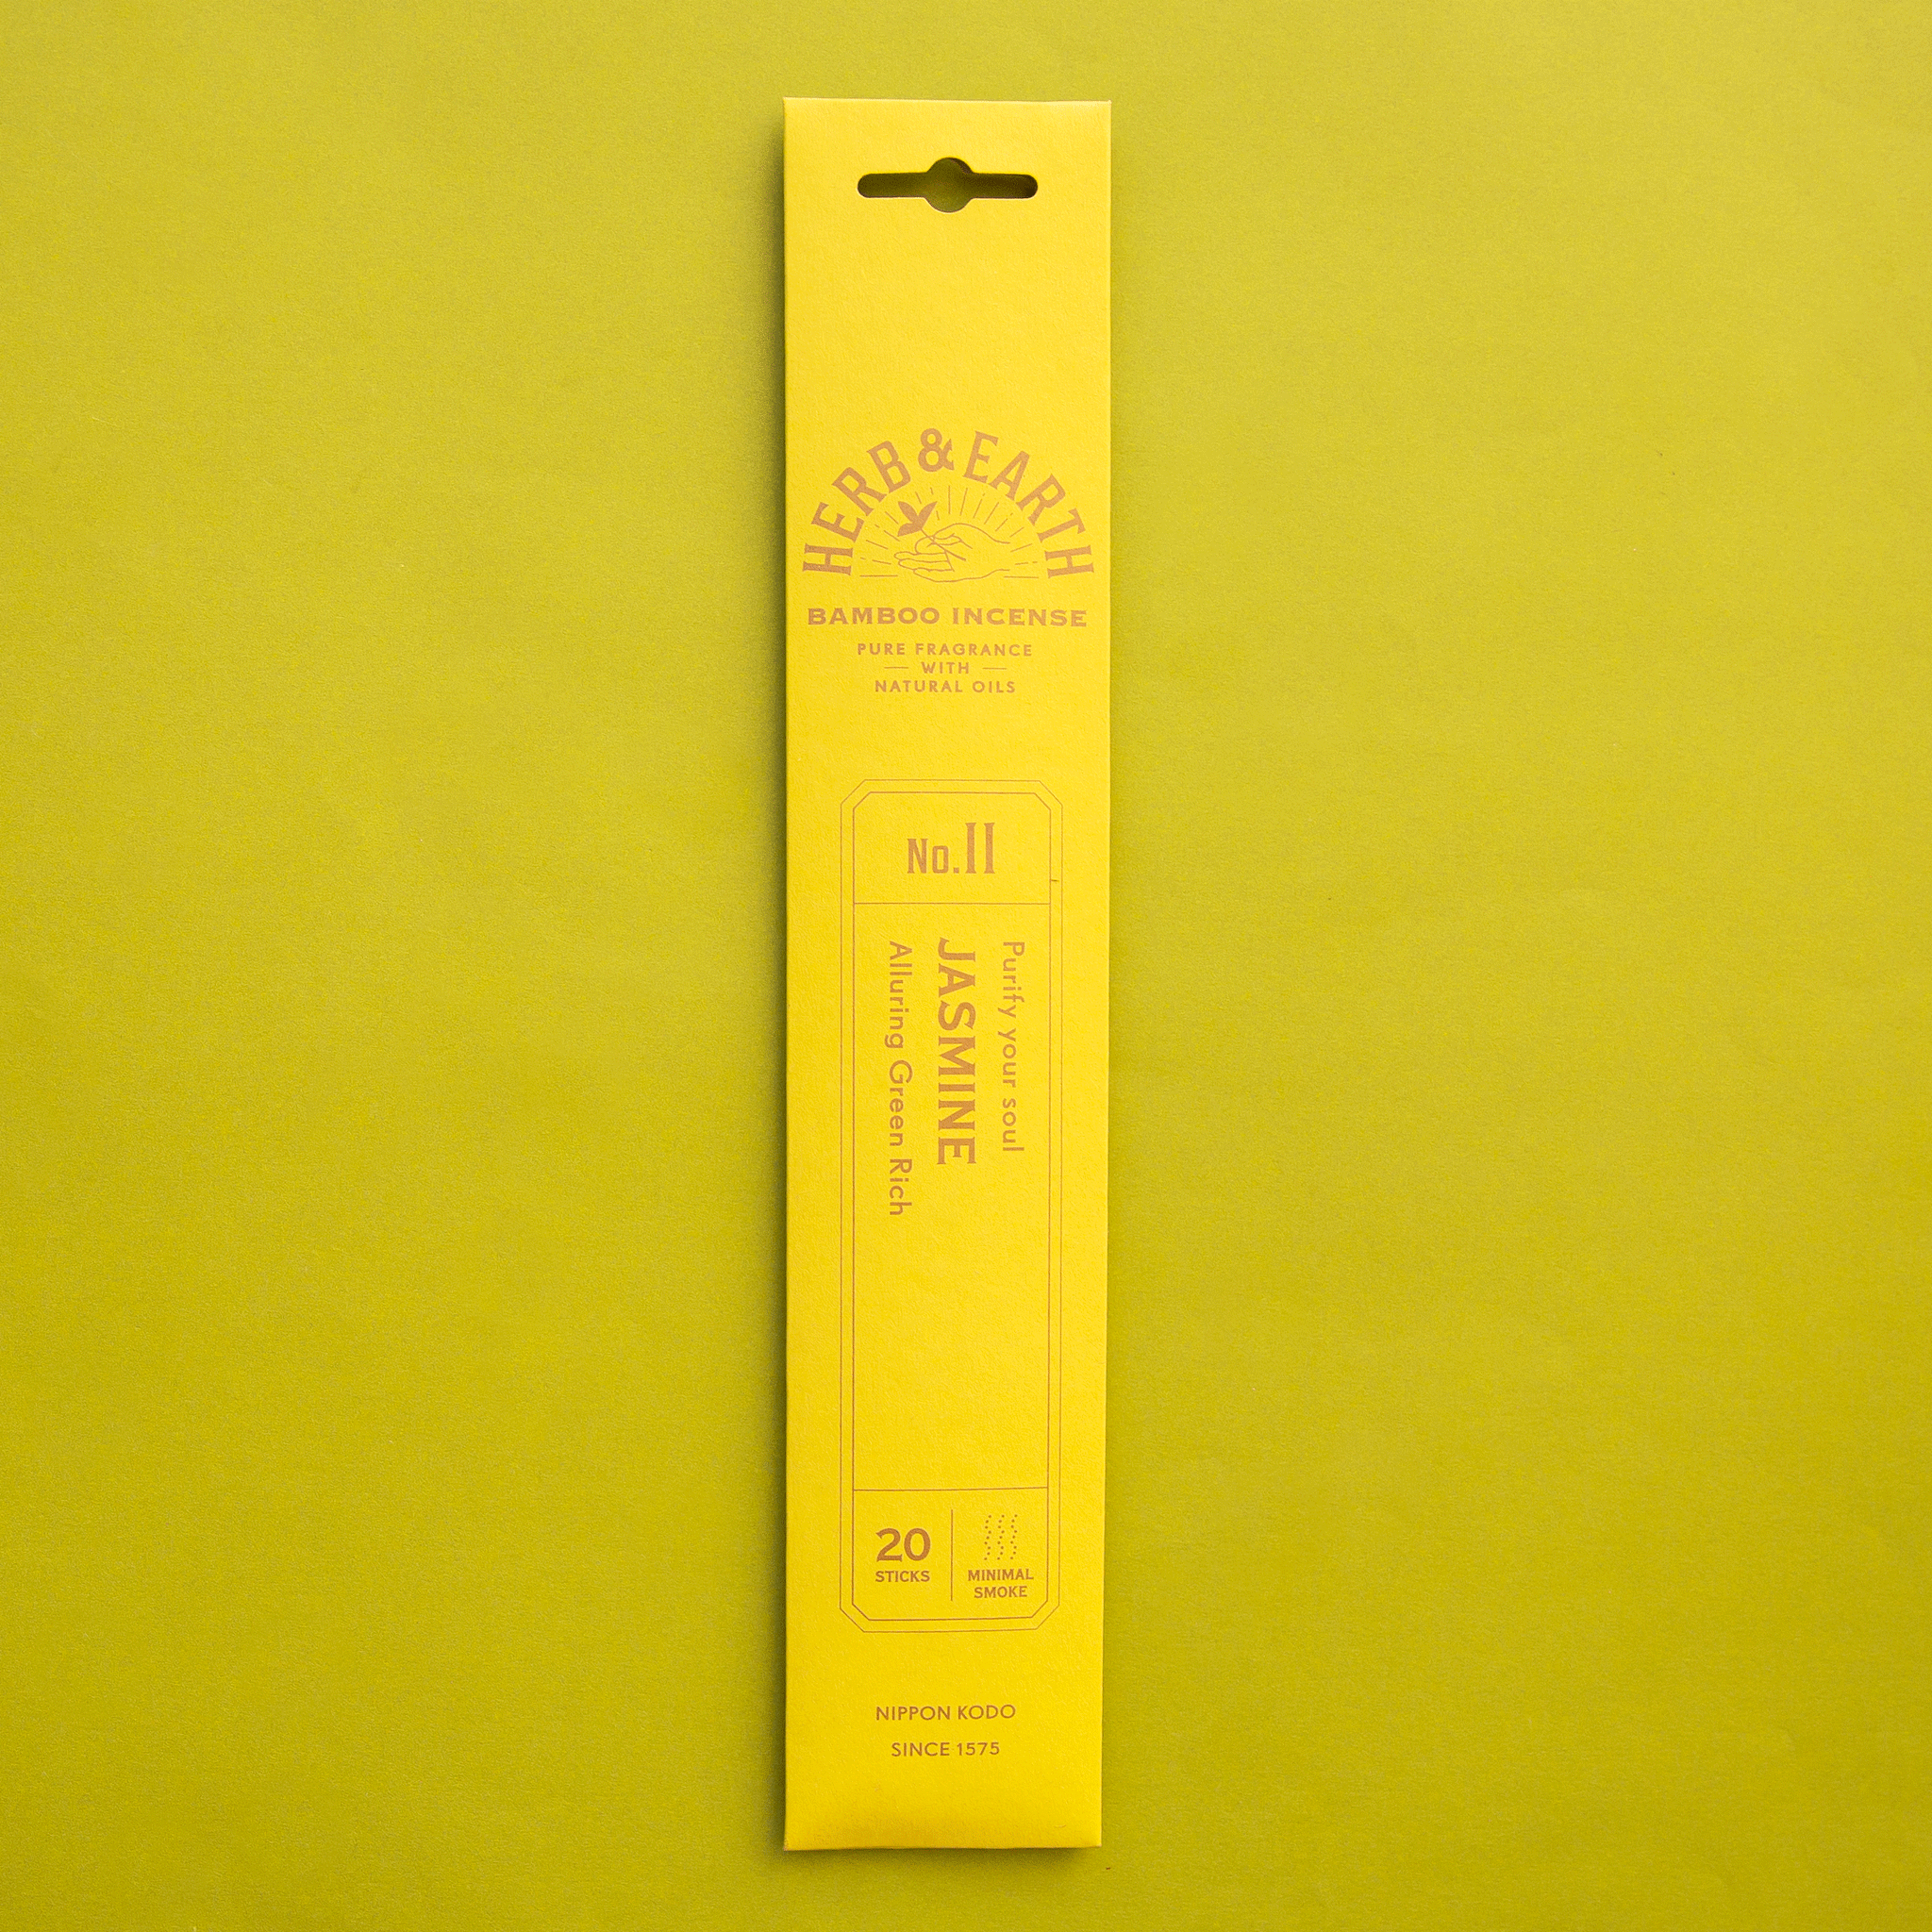 On a chartreuse background is a yellow package of Jasmine scented incense. 